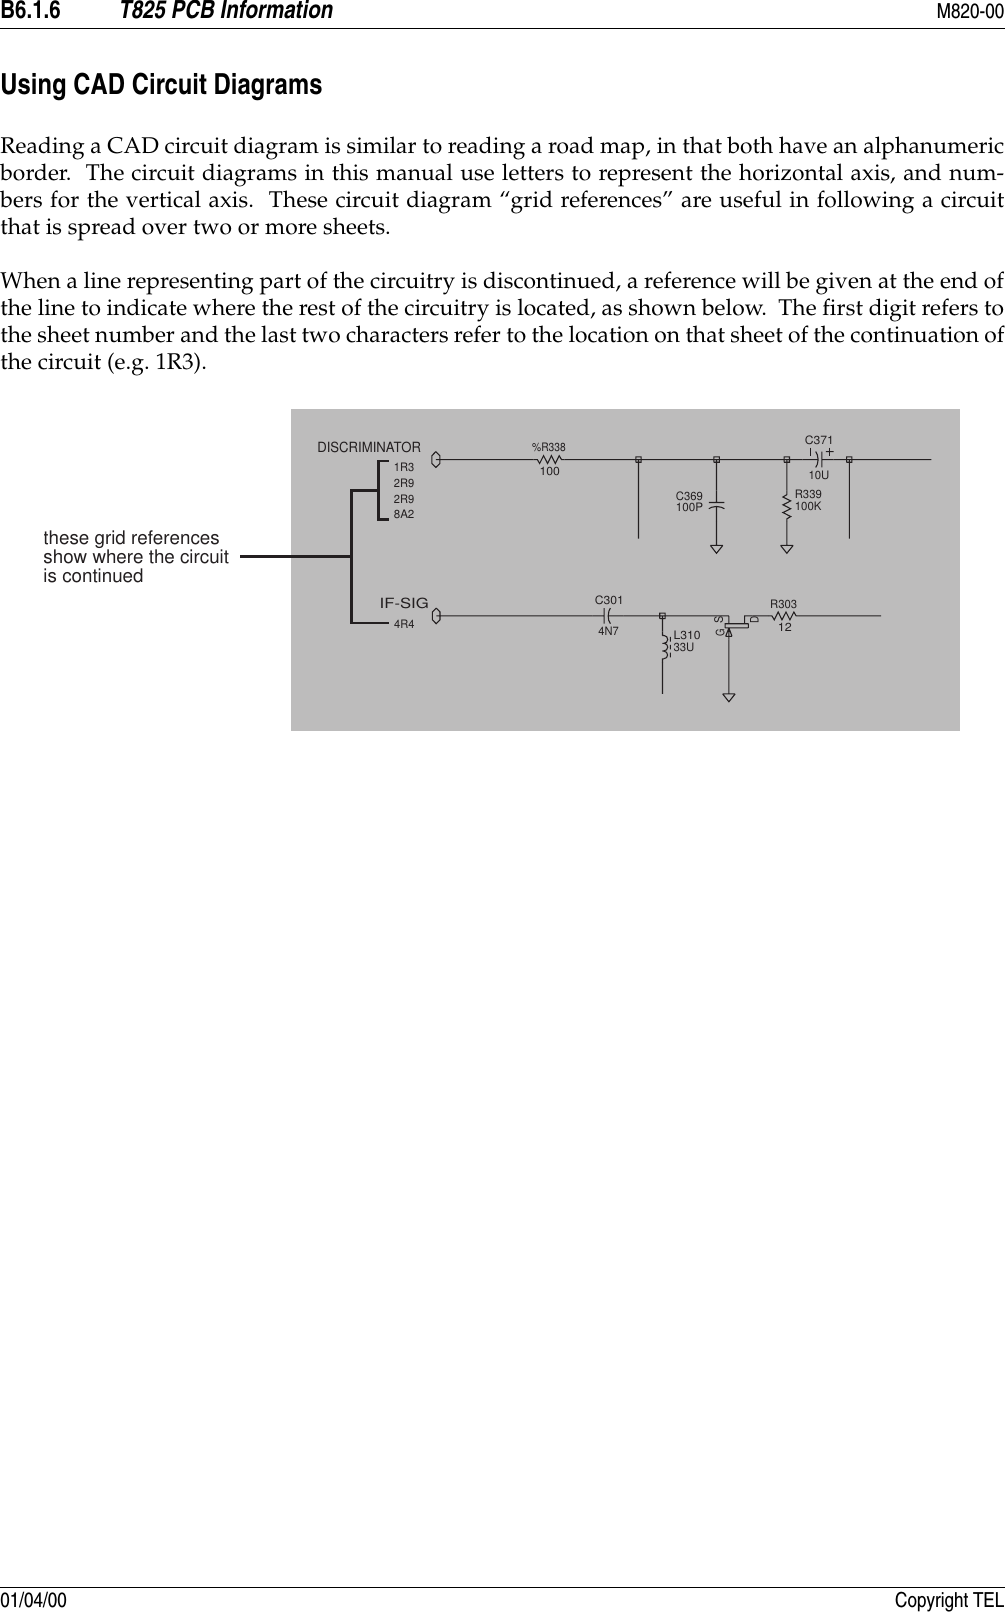 B6.1.6 T825 PCB Information M820-0001/04/00 Copyright TELUsing CAD Circuit DiagramsReading a CAD circuit diagram is similar to reading a road map, in that both have an alphanumericborder.  The circuit diagrams in this manual use letters to represent the horizontal axis, and num-bers for the vertical axis.  These circuit diagram “grid references” are useful in following a circuitthat is spread over two or more sheets.When a line representing part of the circuitry is discontinued, a reference will be given at the end ofthe line to indicate where the rest of the circuitry is located, as shown below.  The first digit refers tothe sheet number and the last two characters refer to the location on that sheet of the continuation ofthe circuit (e.g. 1R3).C3014N7R30312DSGL31033UIF-SIG4R4C369100PC37110UR339100K%R338100DISCRIMINATOR1R32R92R98A2these grid referencesshow where the circuitis continued